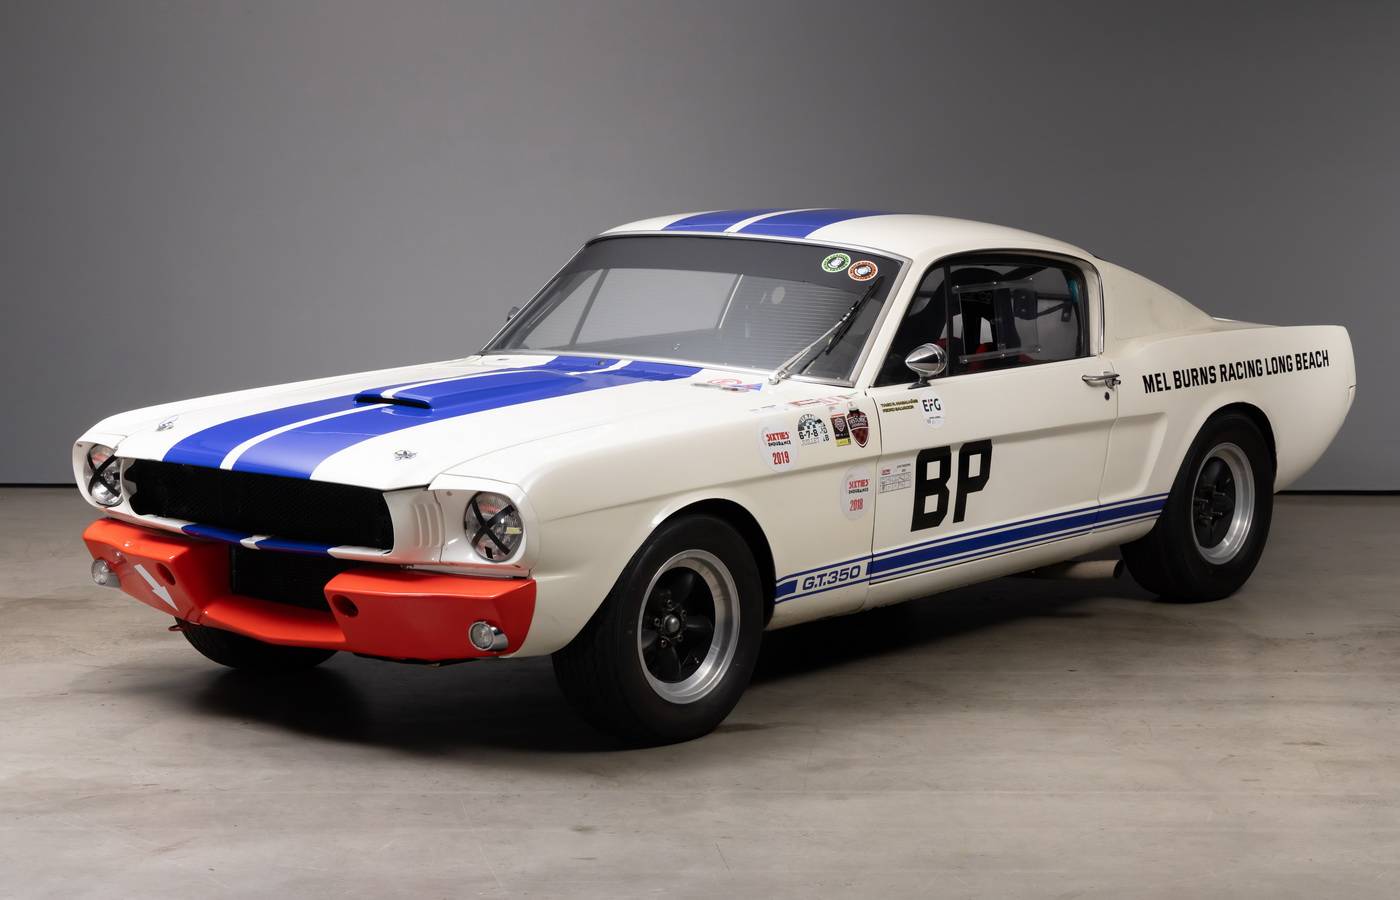 For Sale: Ford Shelby GT 350 (1965) offered for €235,000